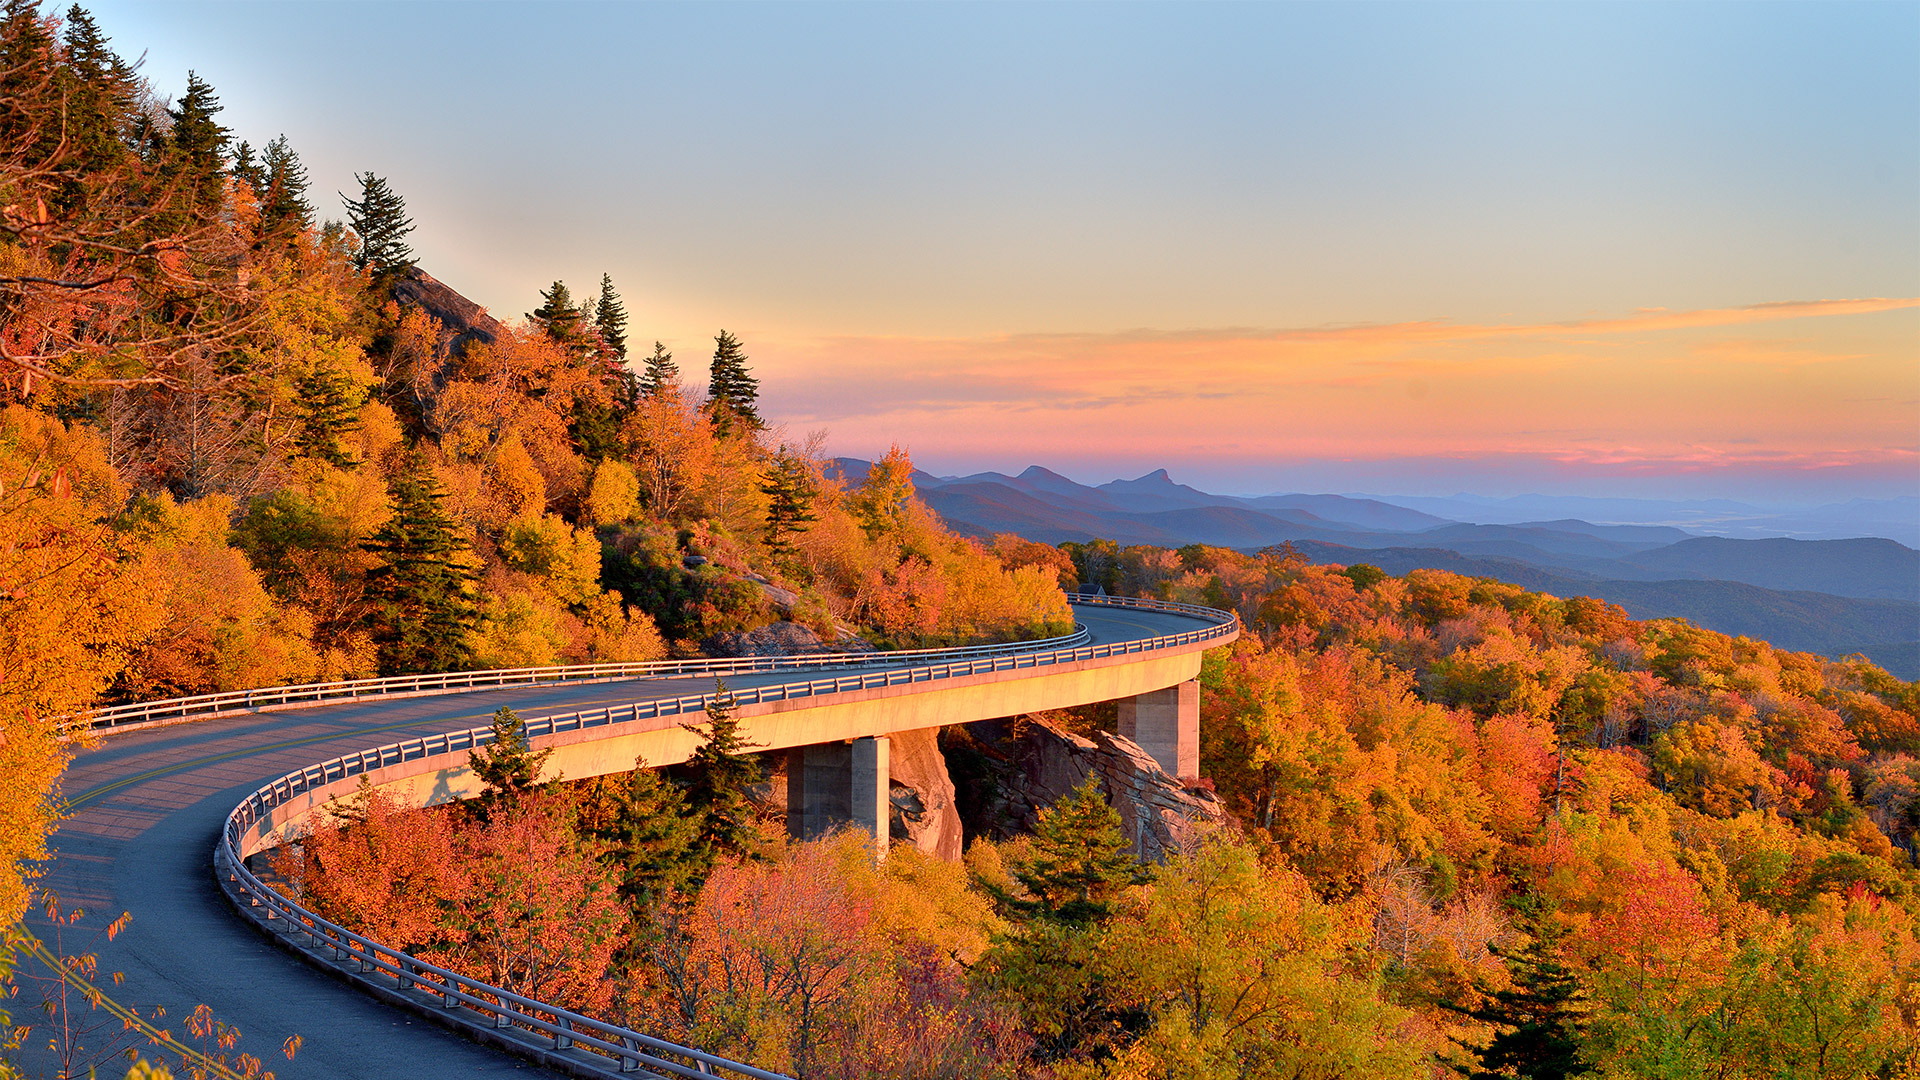 General 1920x1080 trees fall forest road bridge rocks mountains clouds sky hairpin turns